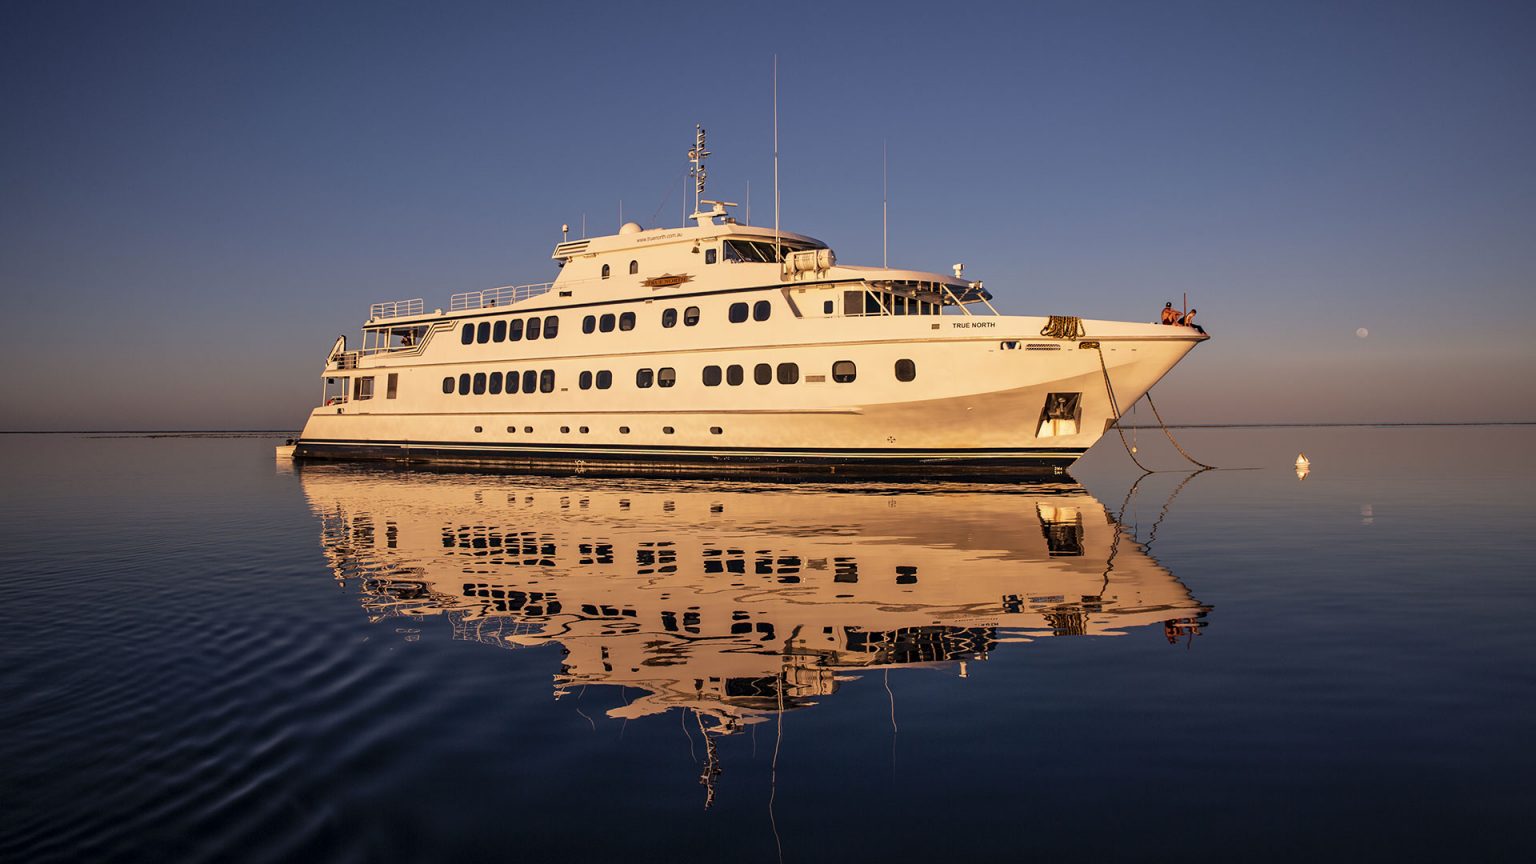 rowley shoals cruises prices